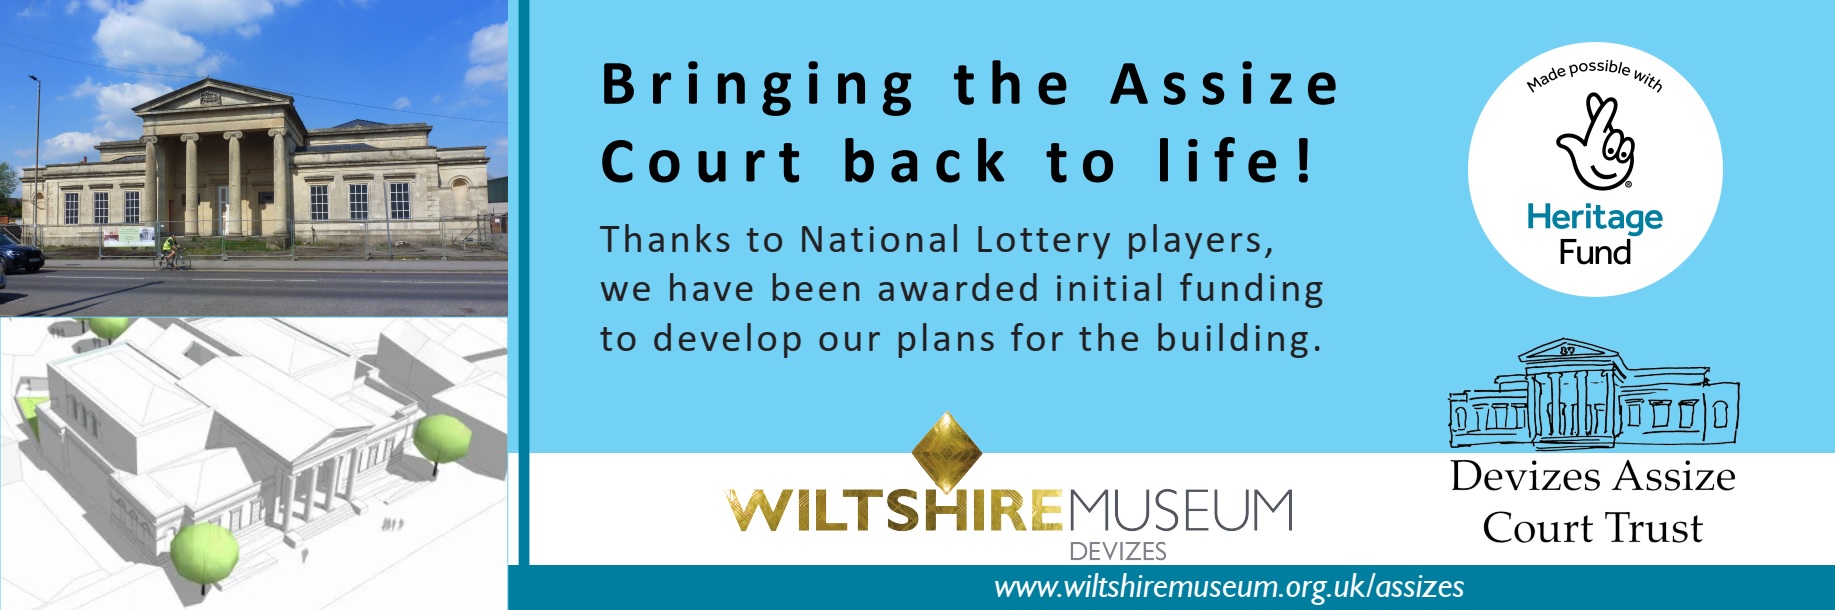 Banner with computer-generated view of the Assize Court and text - Bringing the Assize Court back to life! Thanks to National Lottery players, we have been awarded initial funding to develop our plans for the building.